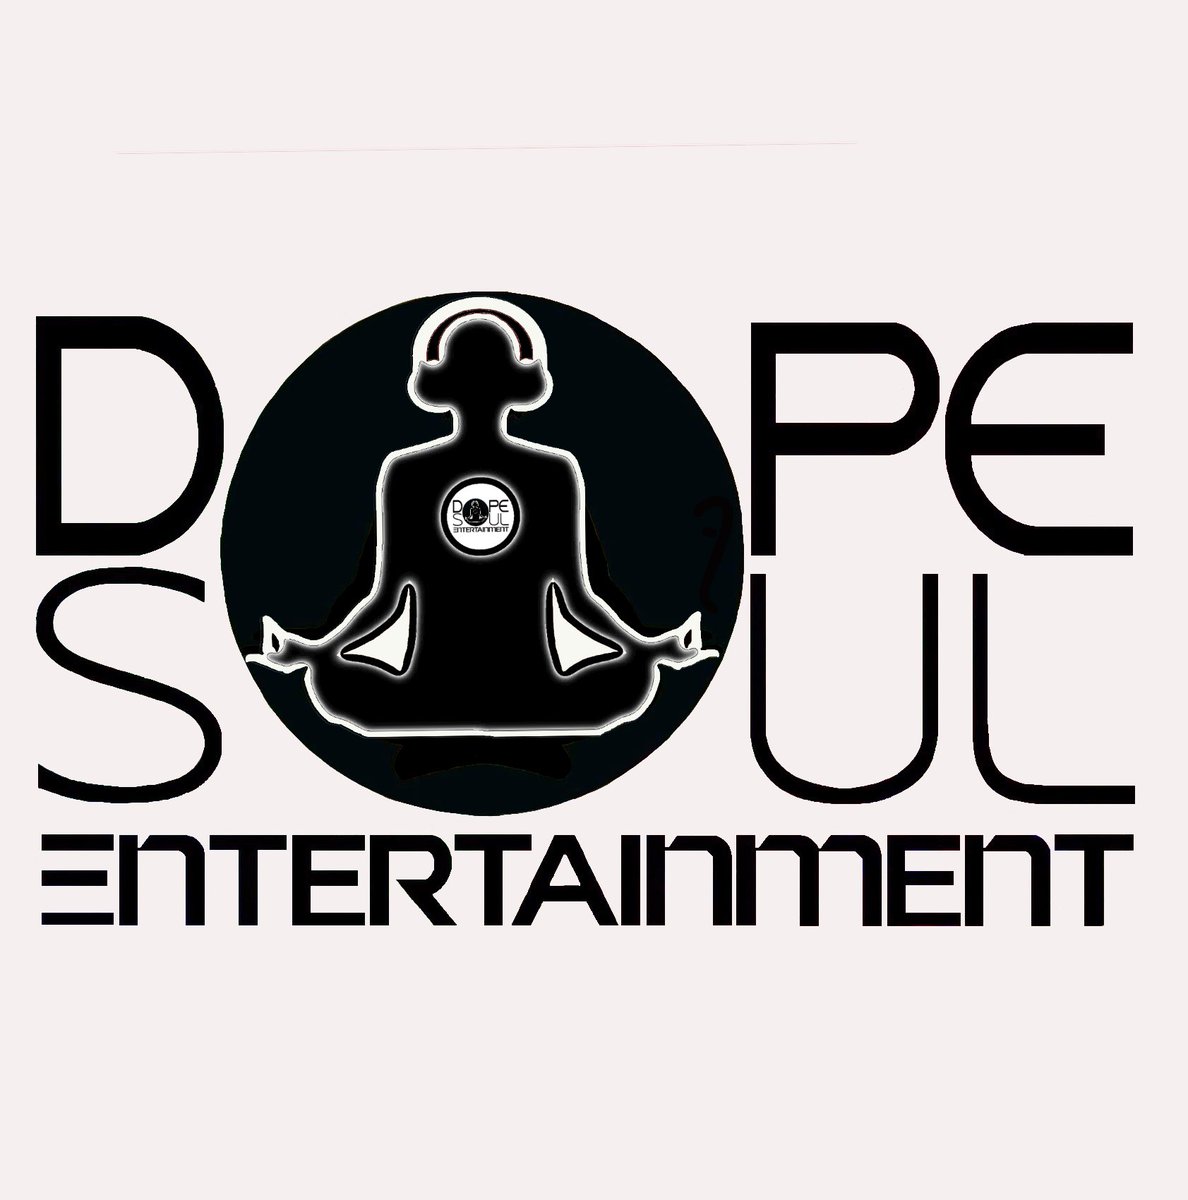 Whats up my #DopeSouls! I just wanted to let some of these promoters know that does soul is ready to help with all your graphic art needs💎
Logo design, fliers, live visuals, and even custom clothing. Don’t be a stranger if you have a an idea✌️